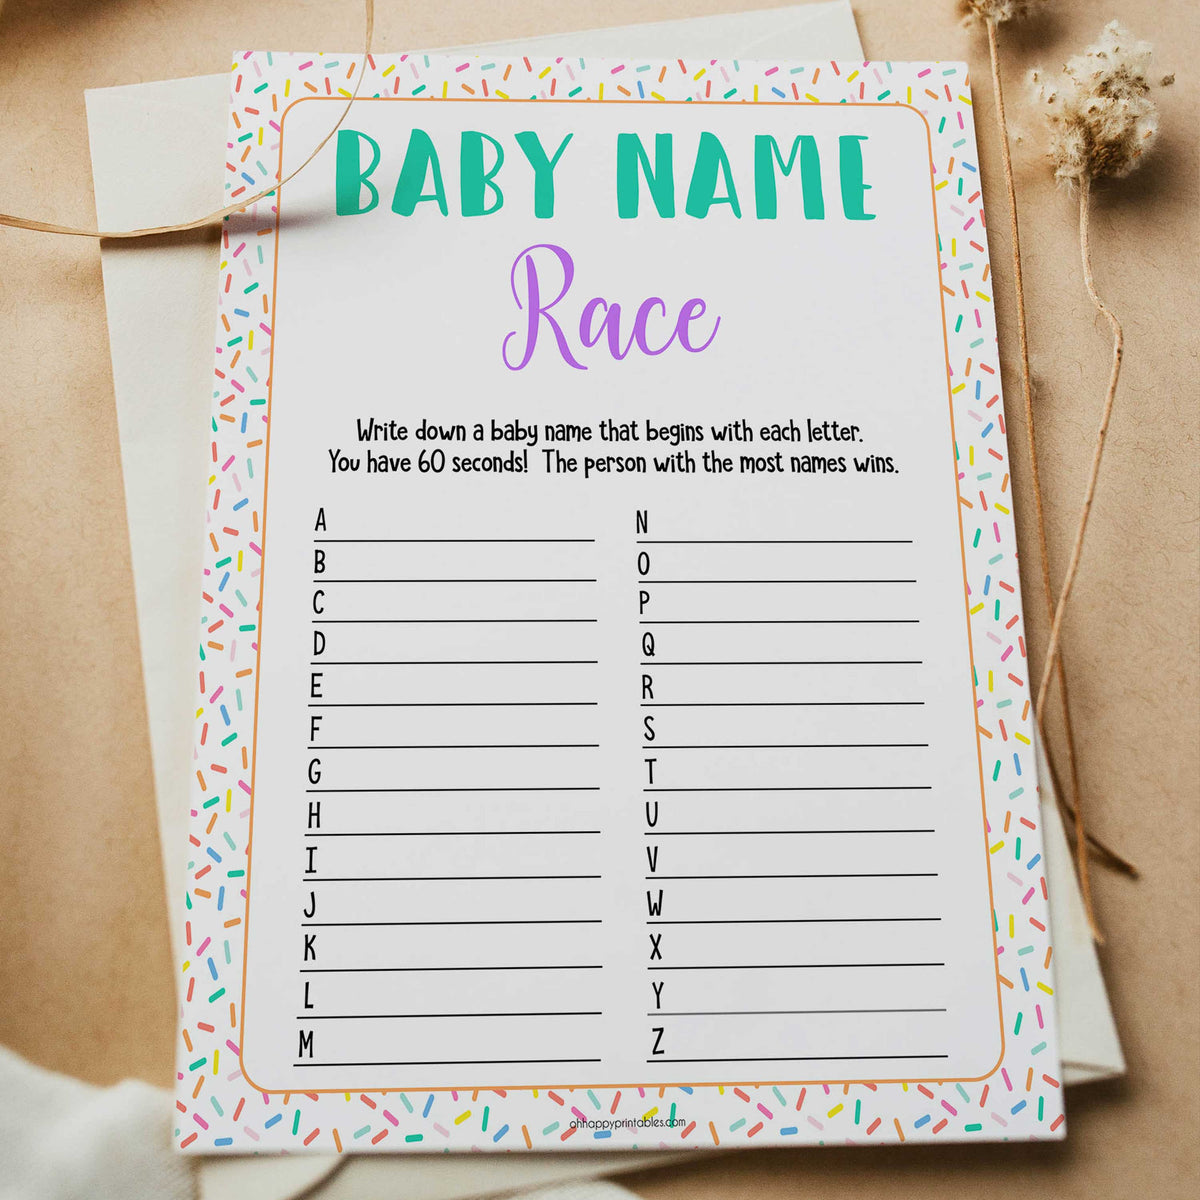 Baby sprinkle games, baby name race game, printable baby games, baby shower games, baby spring theme, popular baby games, fun baby games, baby shower ideas